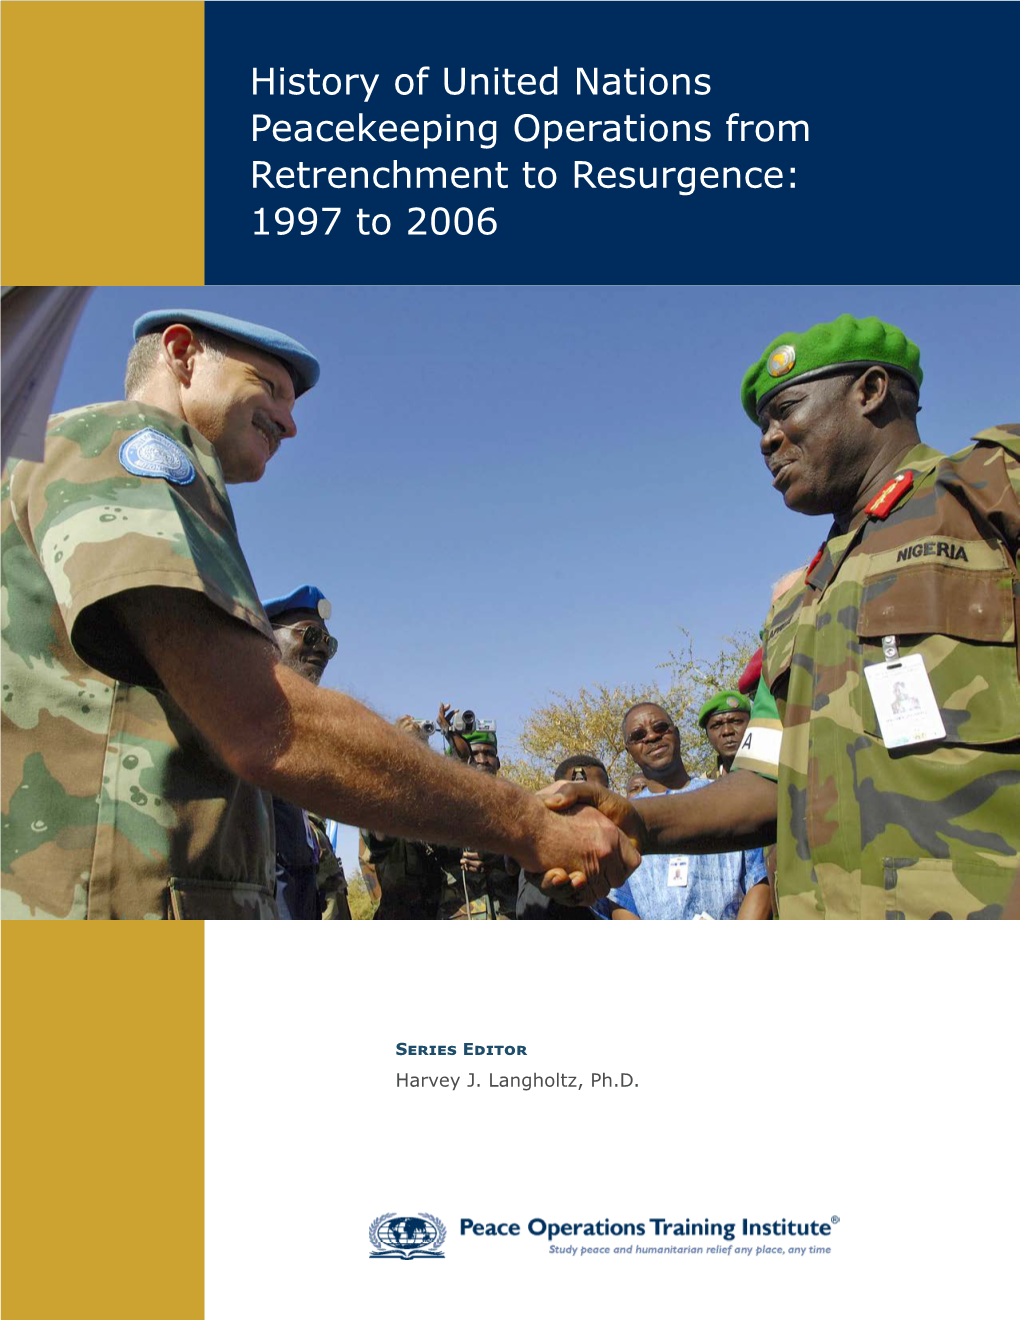 History of United Nations Peacekeeping Operations from Retrenchment to Resurgence: 1997 to 2006